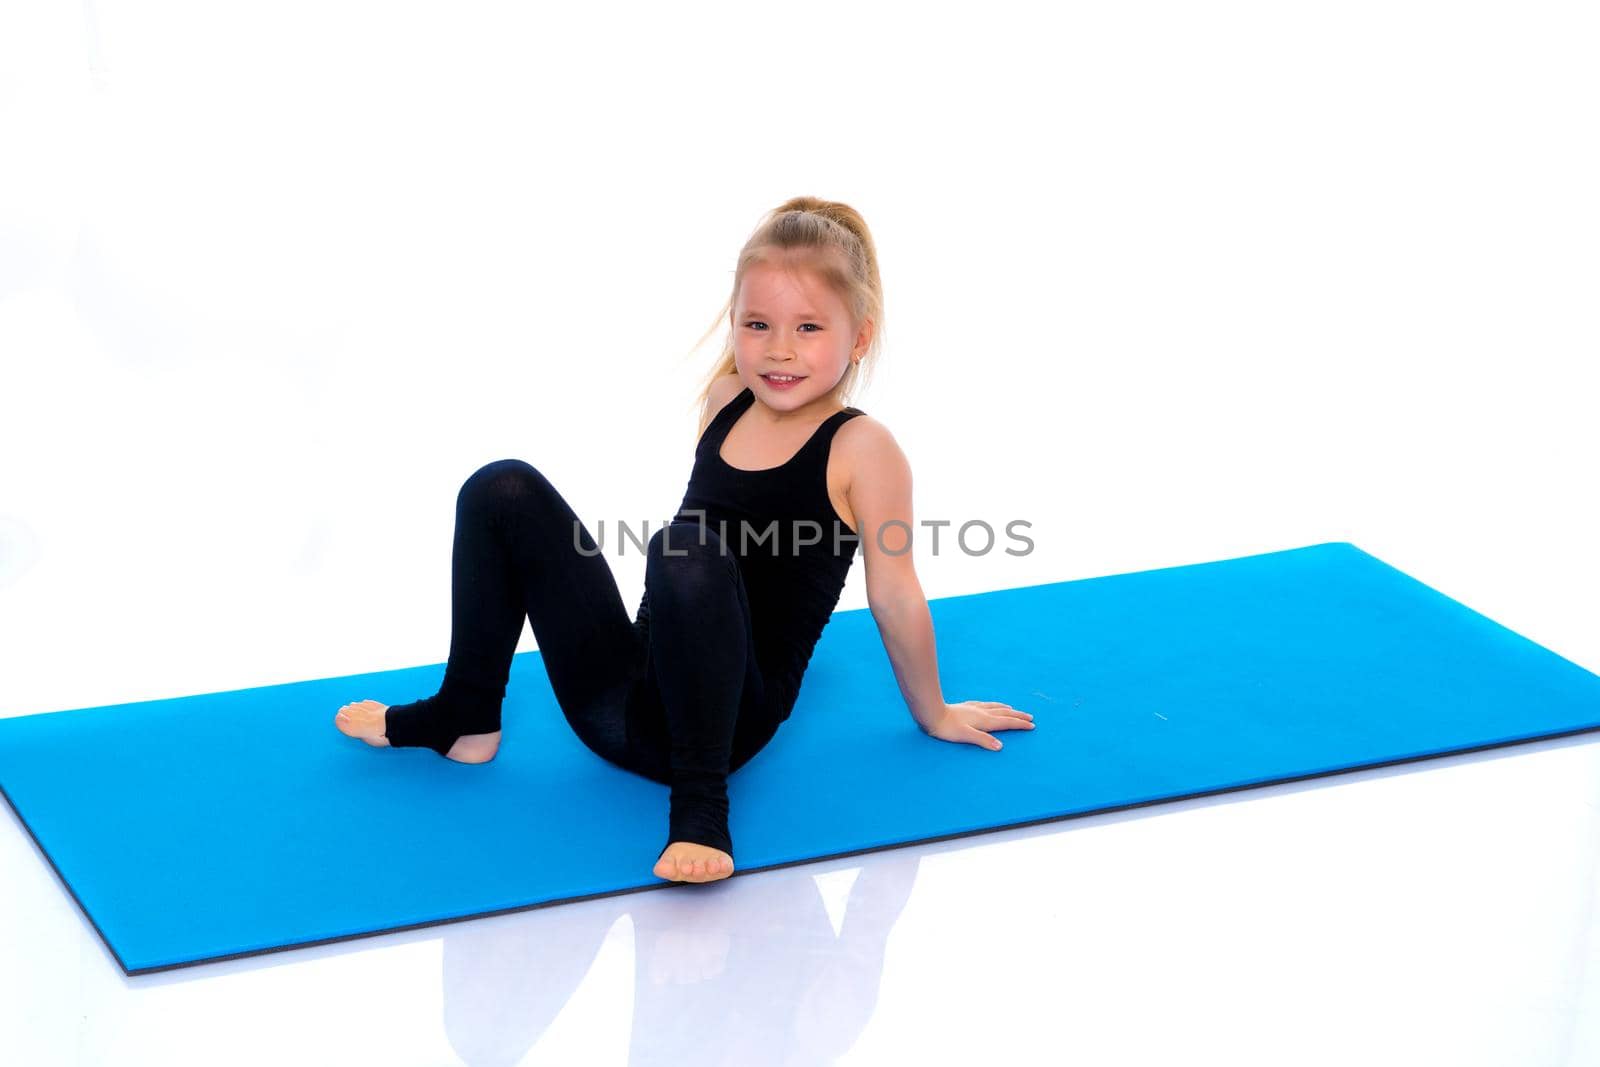 A gymnast girl prepares for the exercise. The concept of childhood and sport, a healthy lifestyle. Isolated on white background.